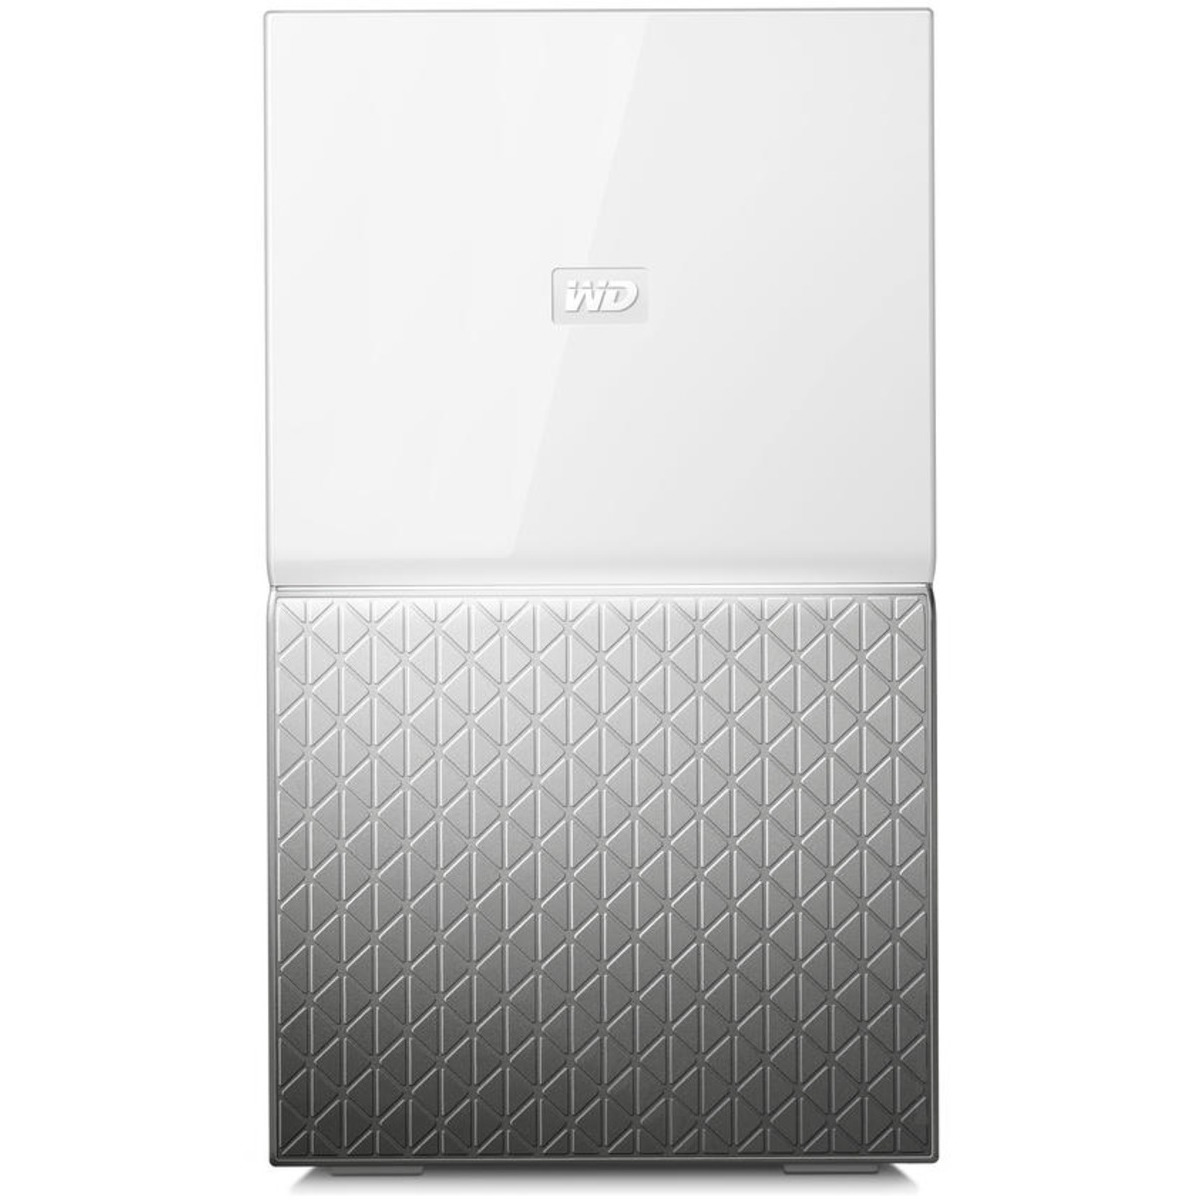 Western Digital My Cloud Home Duo 4tb 2-Bay Desktop Personal / Basic Home / Small Office DAS - Direct Attached Storage Device 1x4tb Western Digital Red Pro WD4005FFBX 3.5 7200rpm SATA 6Gb/s HDD NAS Class Drives Installed - Burn-In Tested My Cloud Home Duo